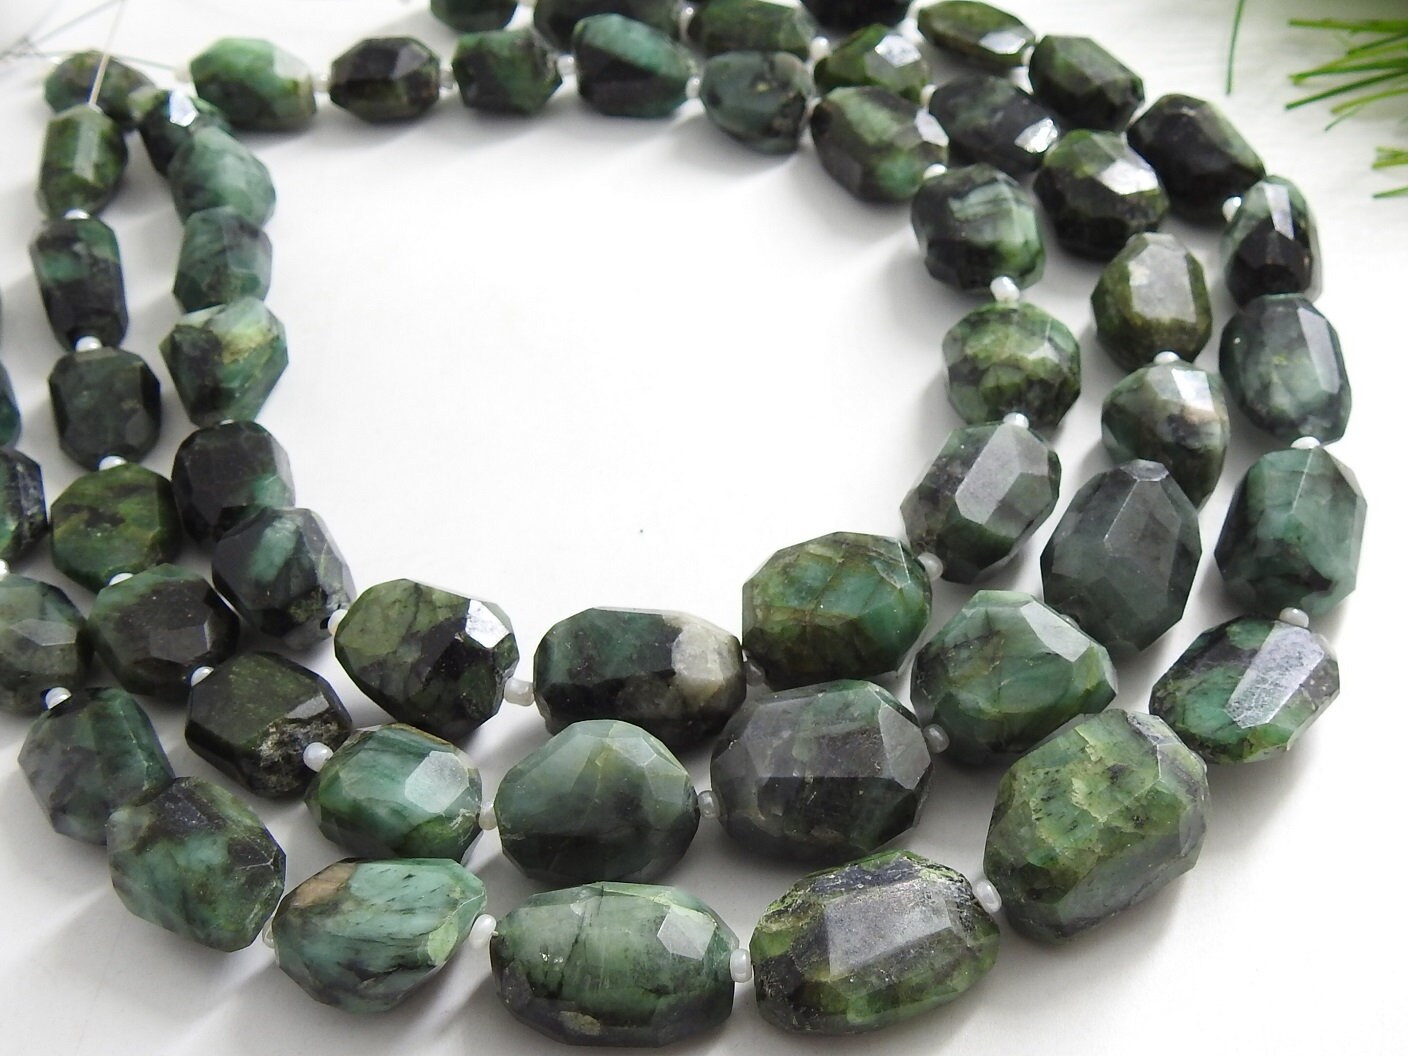 100%Natural,Emerald Faceted Tumble,Nugget,Irregular Shape Bead,Loose Stone,Handmade 12Inch 18X12To10XMM Approx Wholesaler,Supplies (pme)TU1 | Save 33% - Rajasthan Living 12